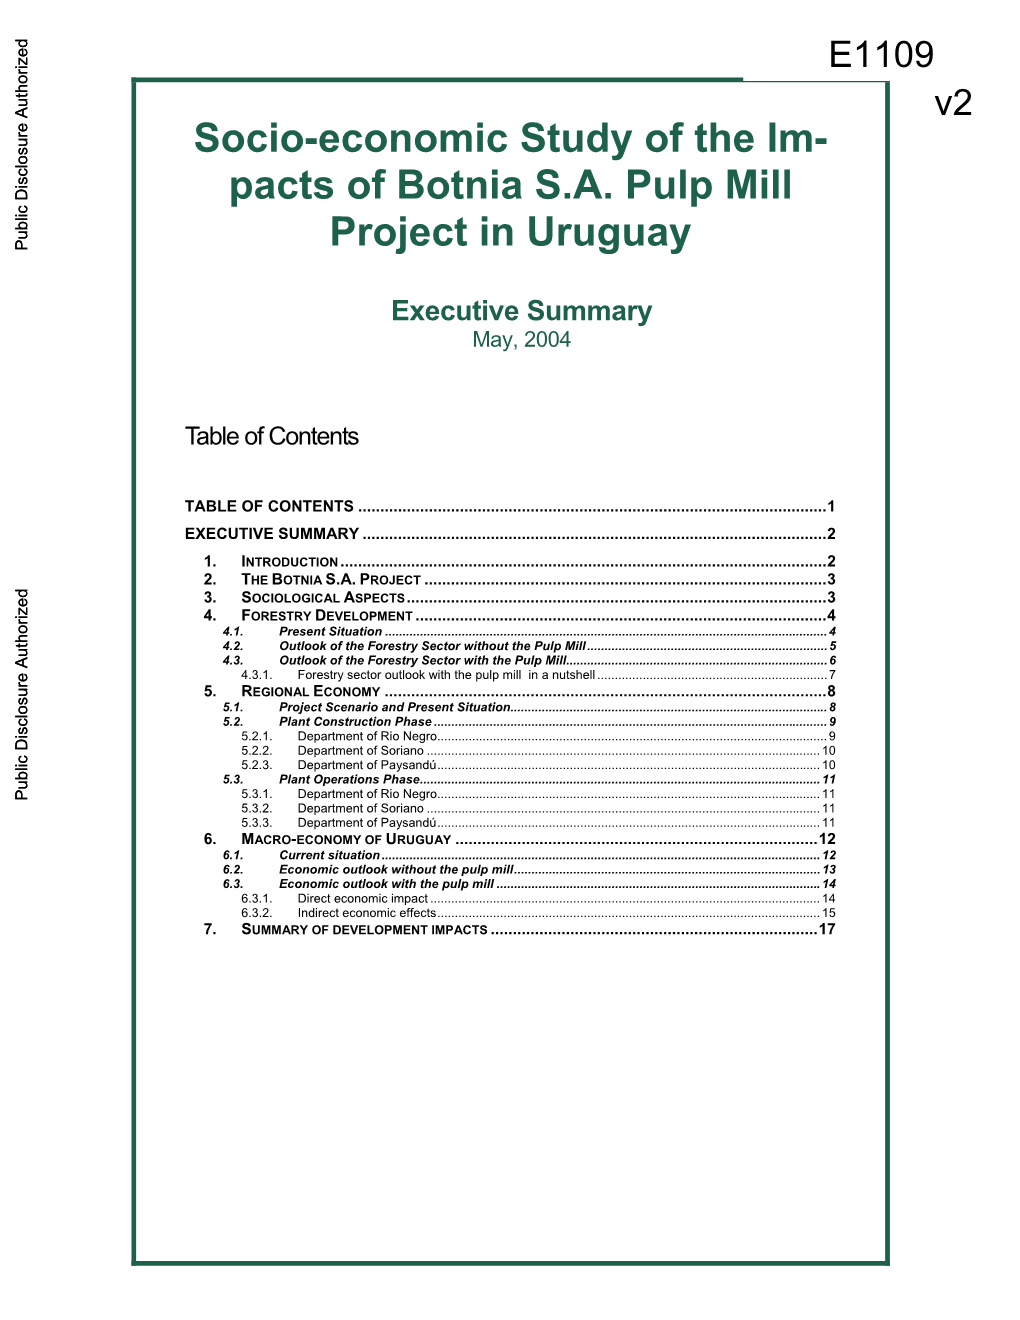 Pacts of Botnia SA Pulp Mill Project in Uruguay